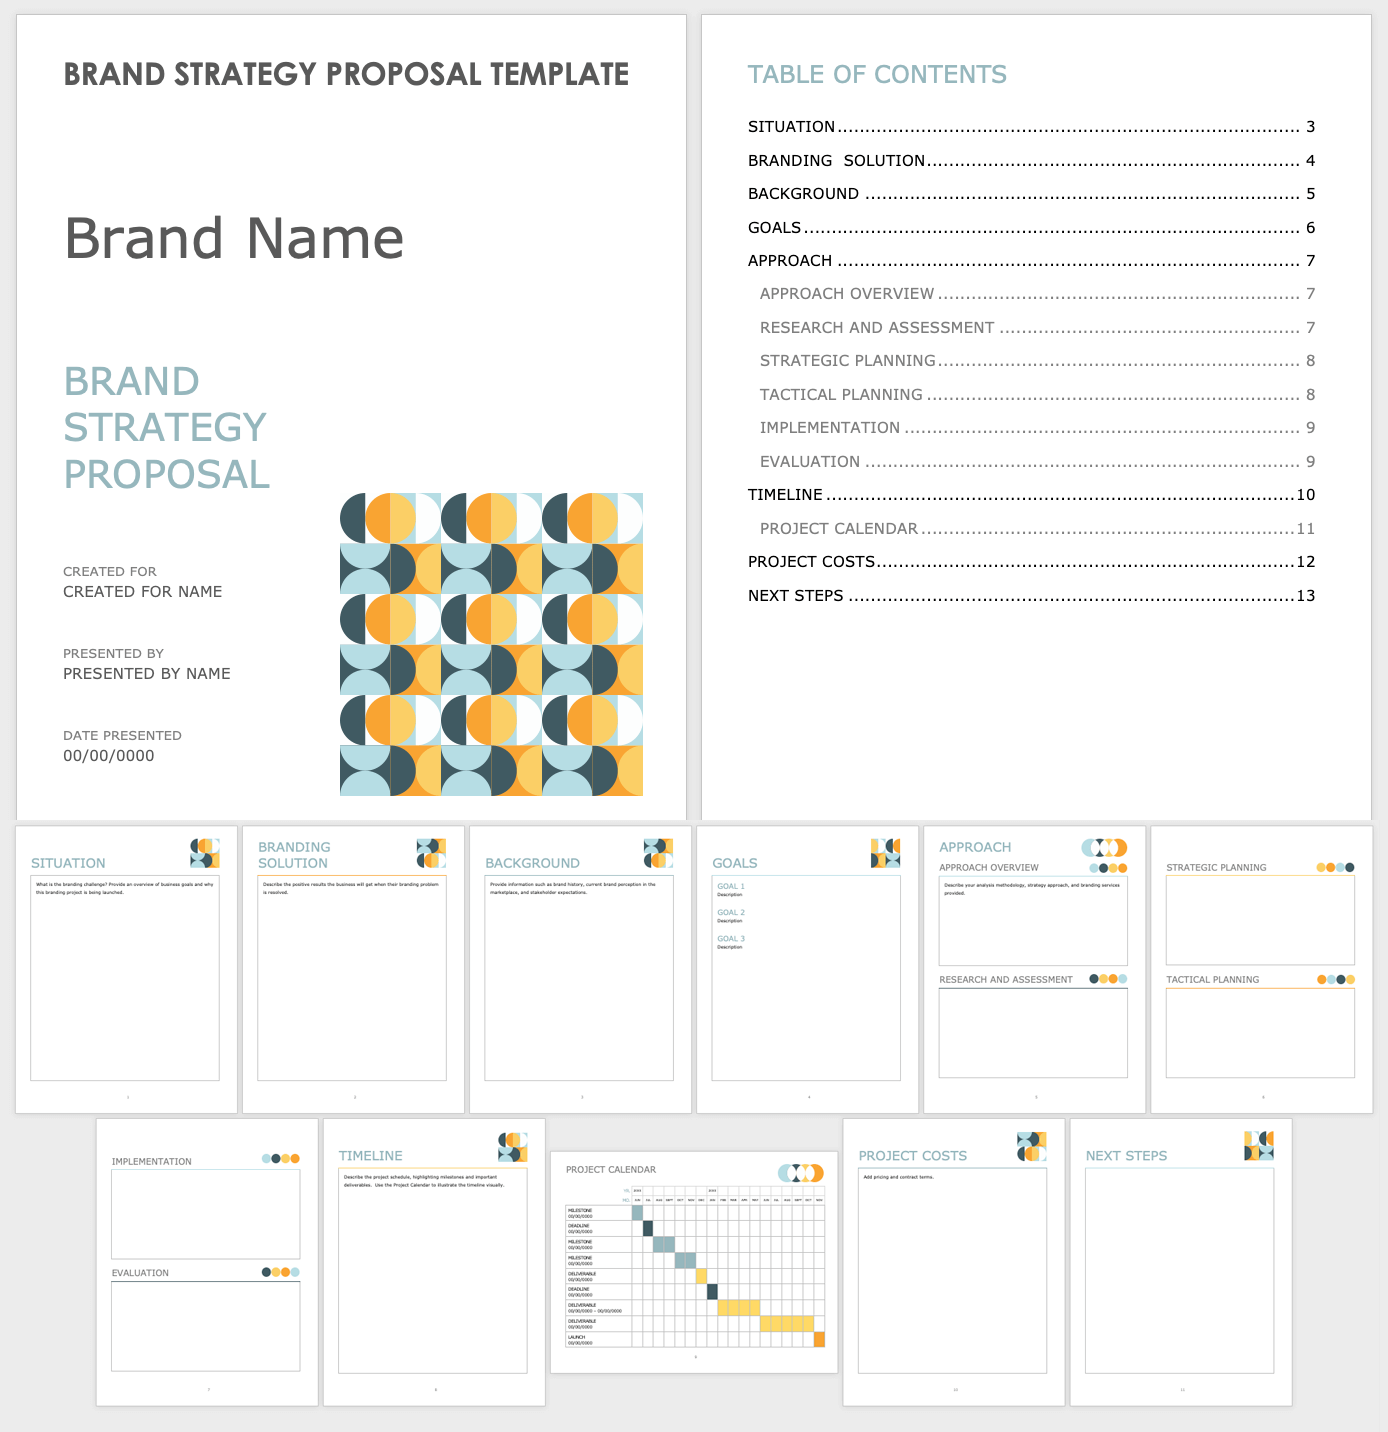 Brand Strategy Proposal Template